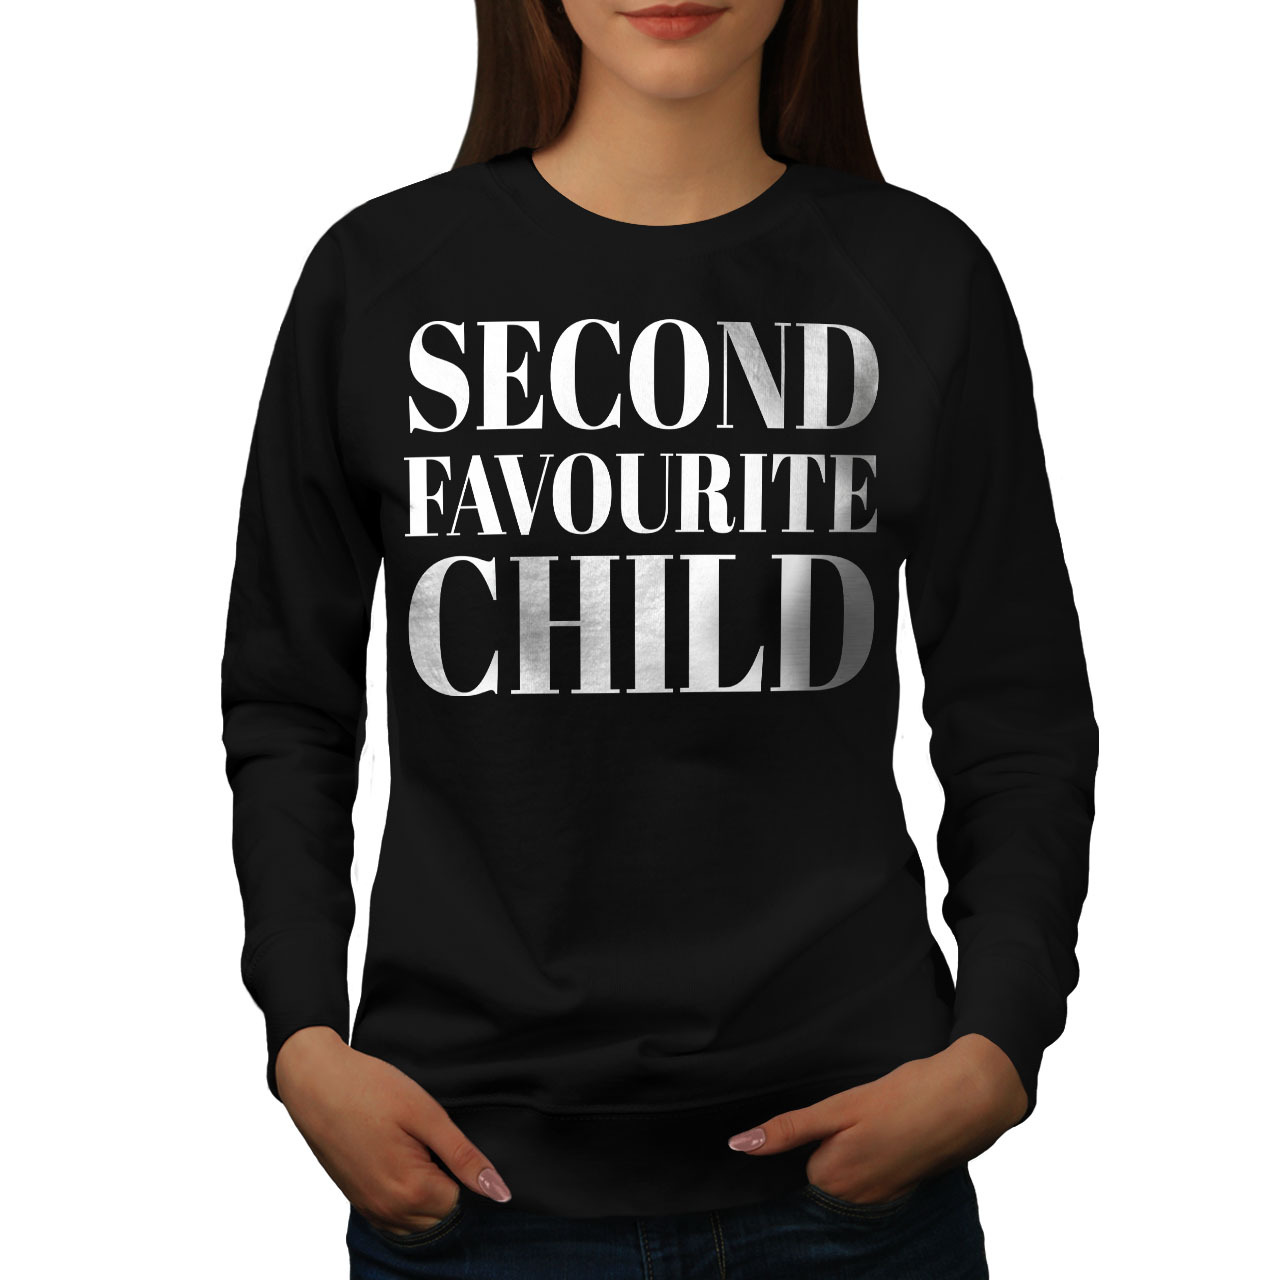 Primary image for Second Favorite Child Jumper Funny Women Sweatshirt